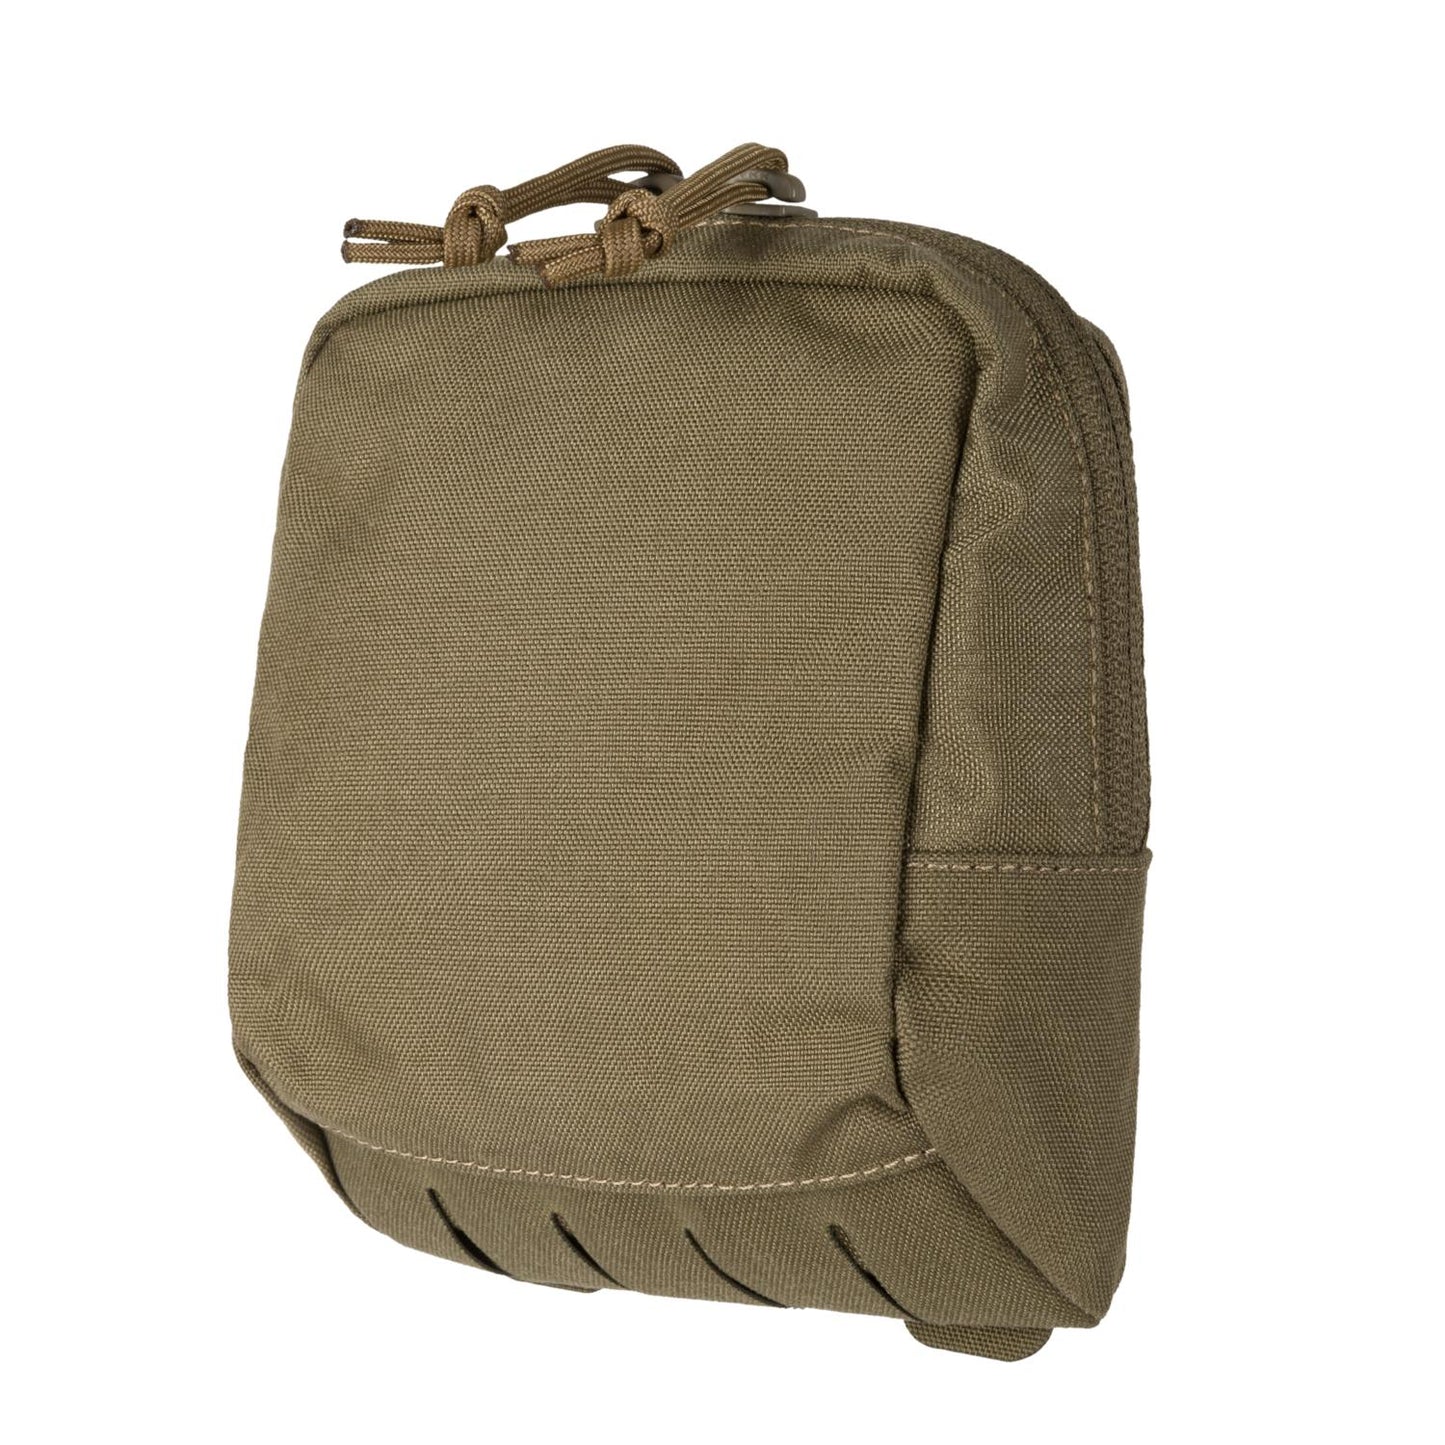 DIRECT ACTION UTILITY POUCH SMALL